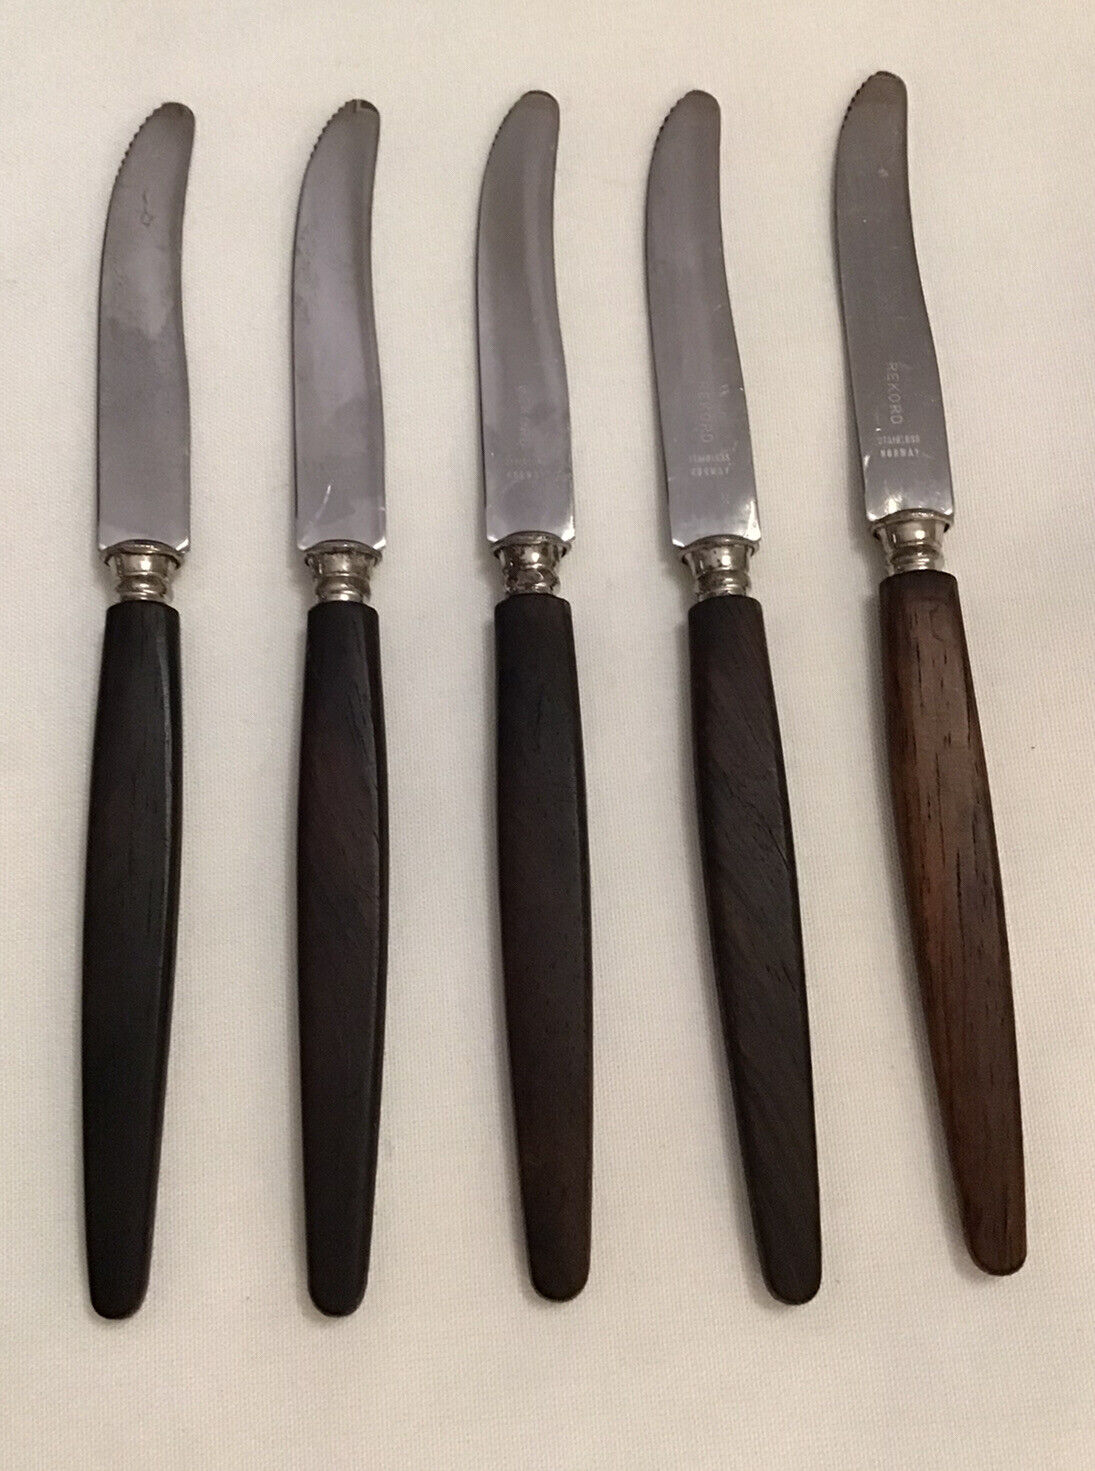 REKORD Stainless Norway MCM Five Teak Stainless Serated Fruit Knives 7”